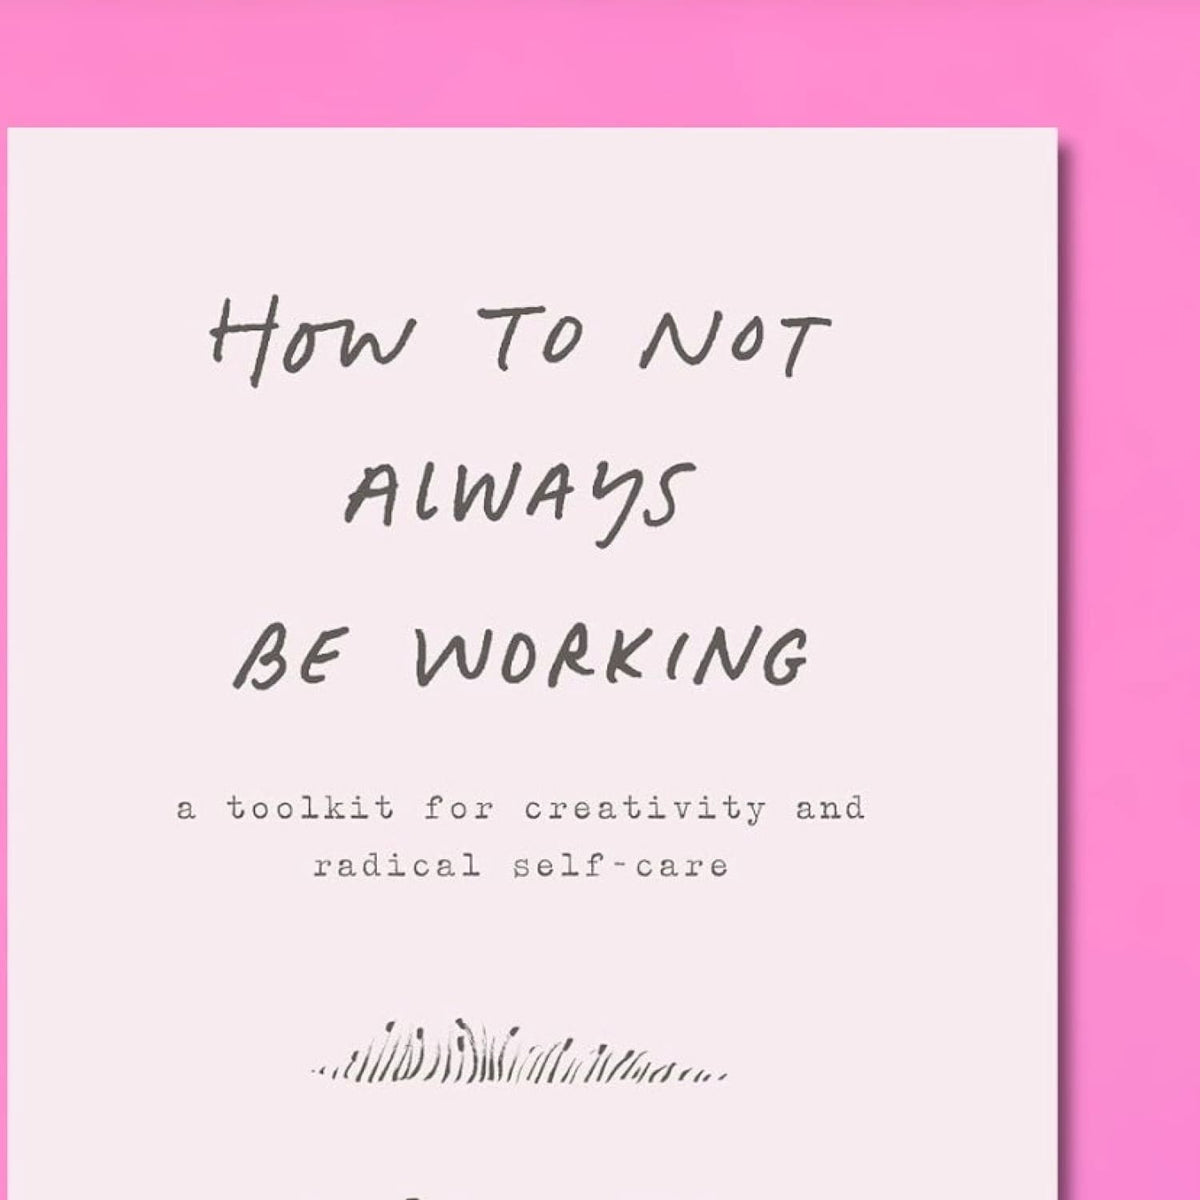 How To Not Always Be Working: a Toolkit For Creativity